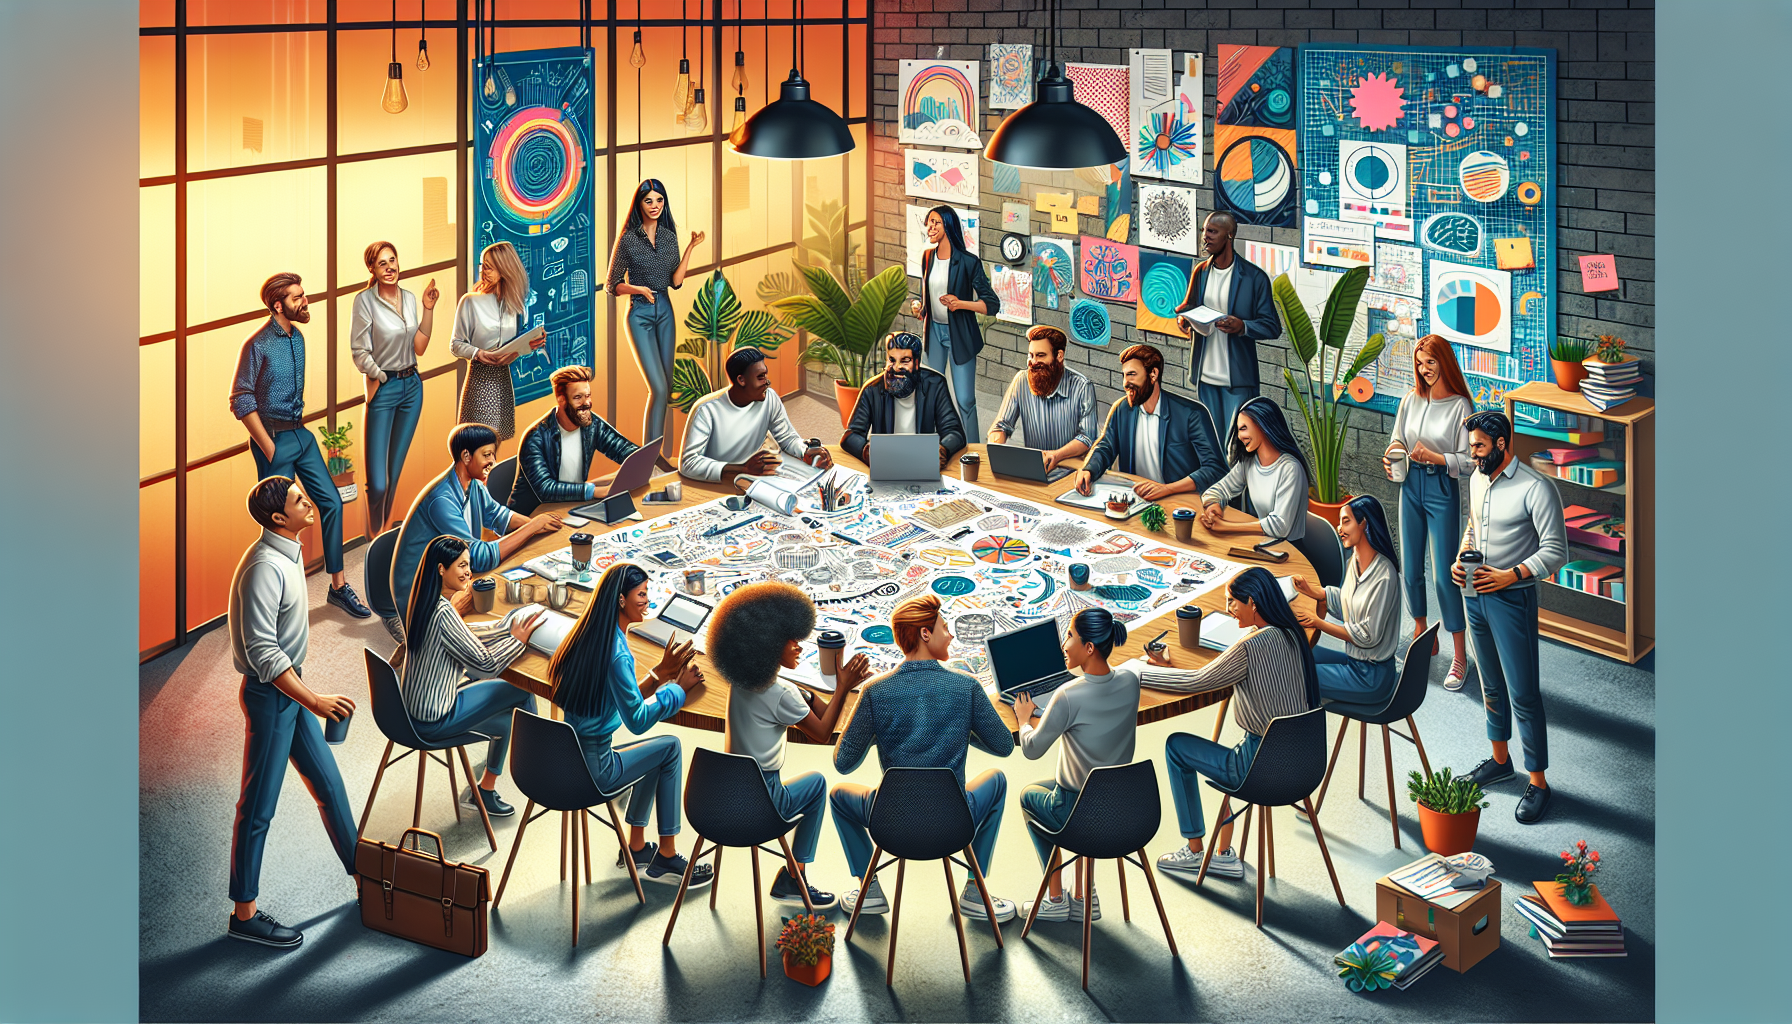 Illustration of diverse group of employees collaborating in a positive work environment